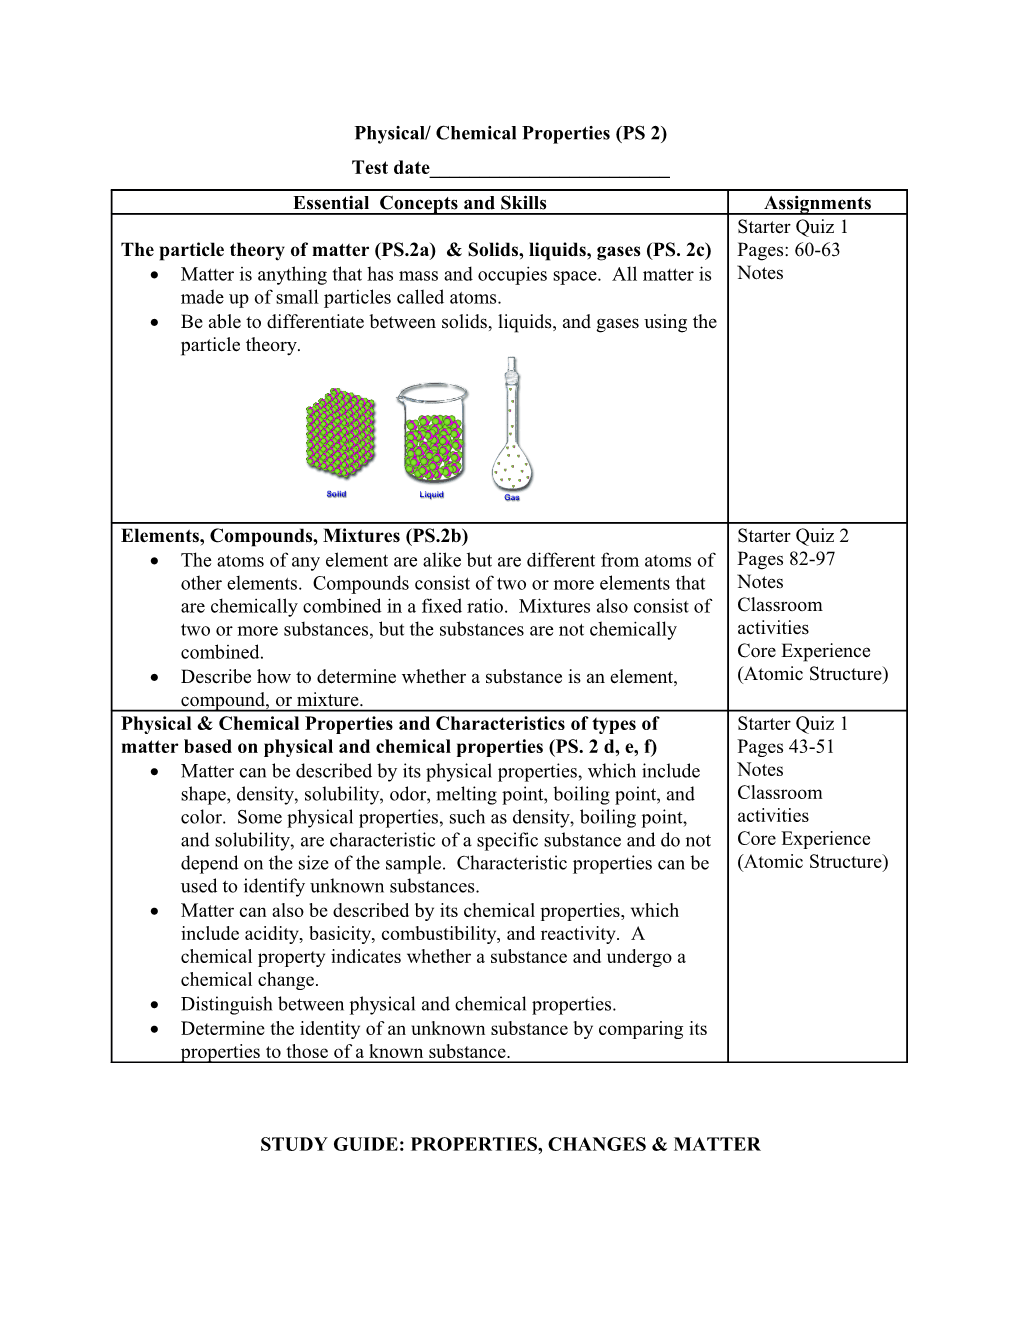 Physical/ Chemical Properties(PS 2)